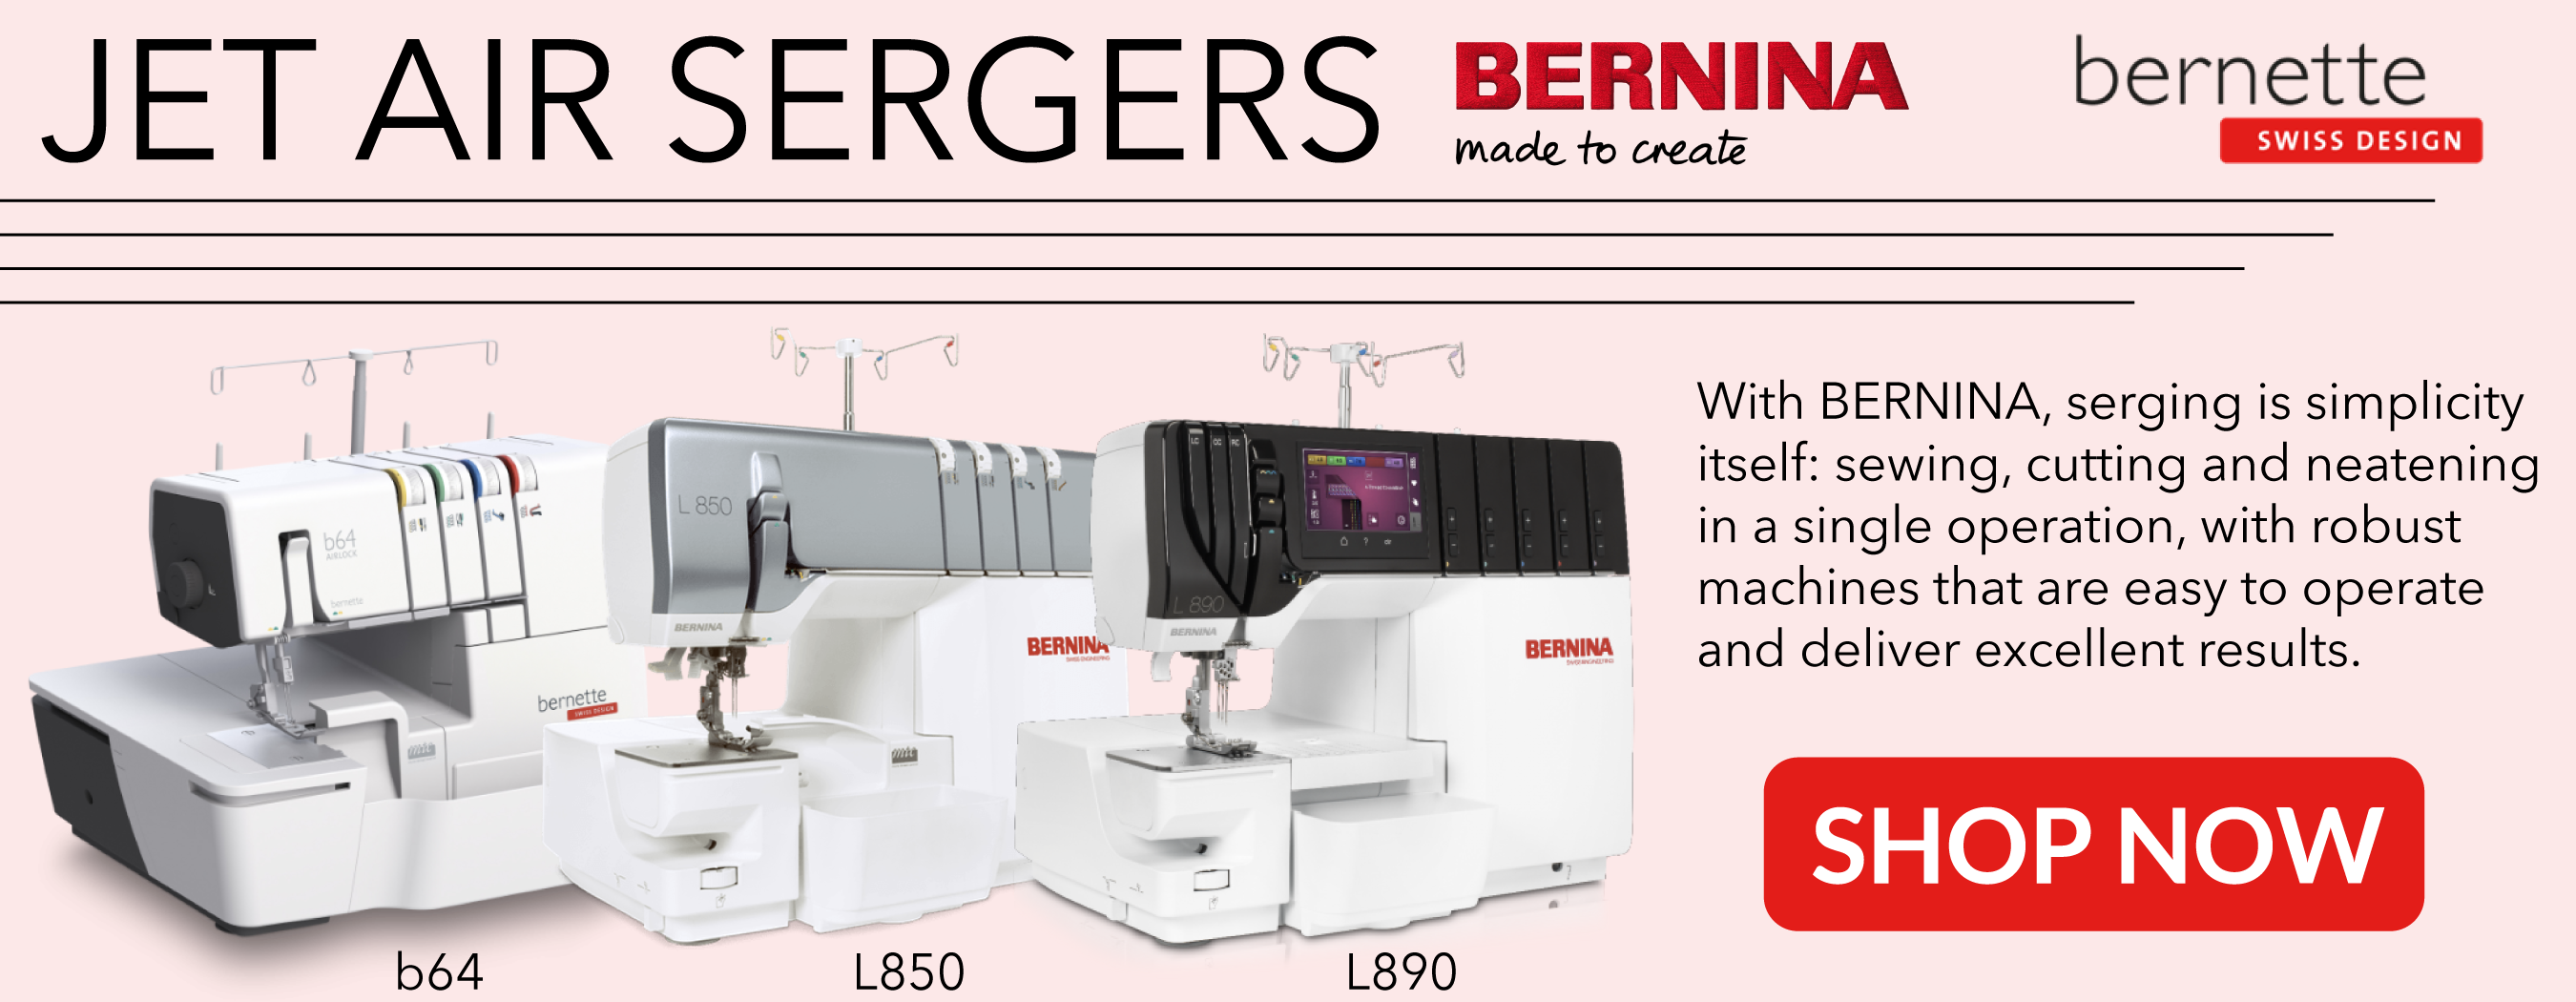 jet air sergers from bernina and bernette. b64, l850 and l890 pictured. with bernina serging is simplicity itself: sewing cutting and neatening in a single operation. with robust machines that are easy to operate and deliver excellent results. shop now